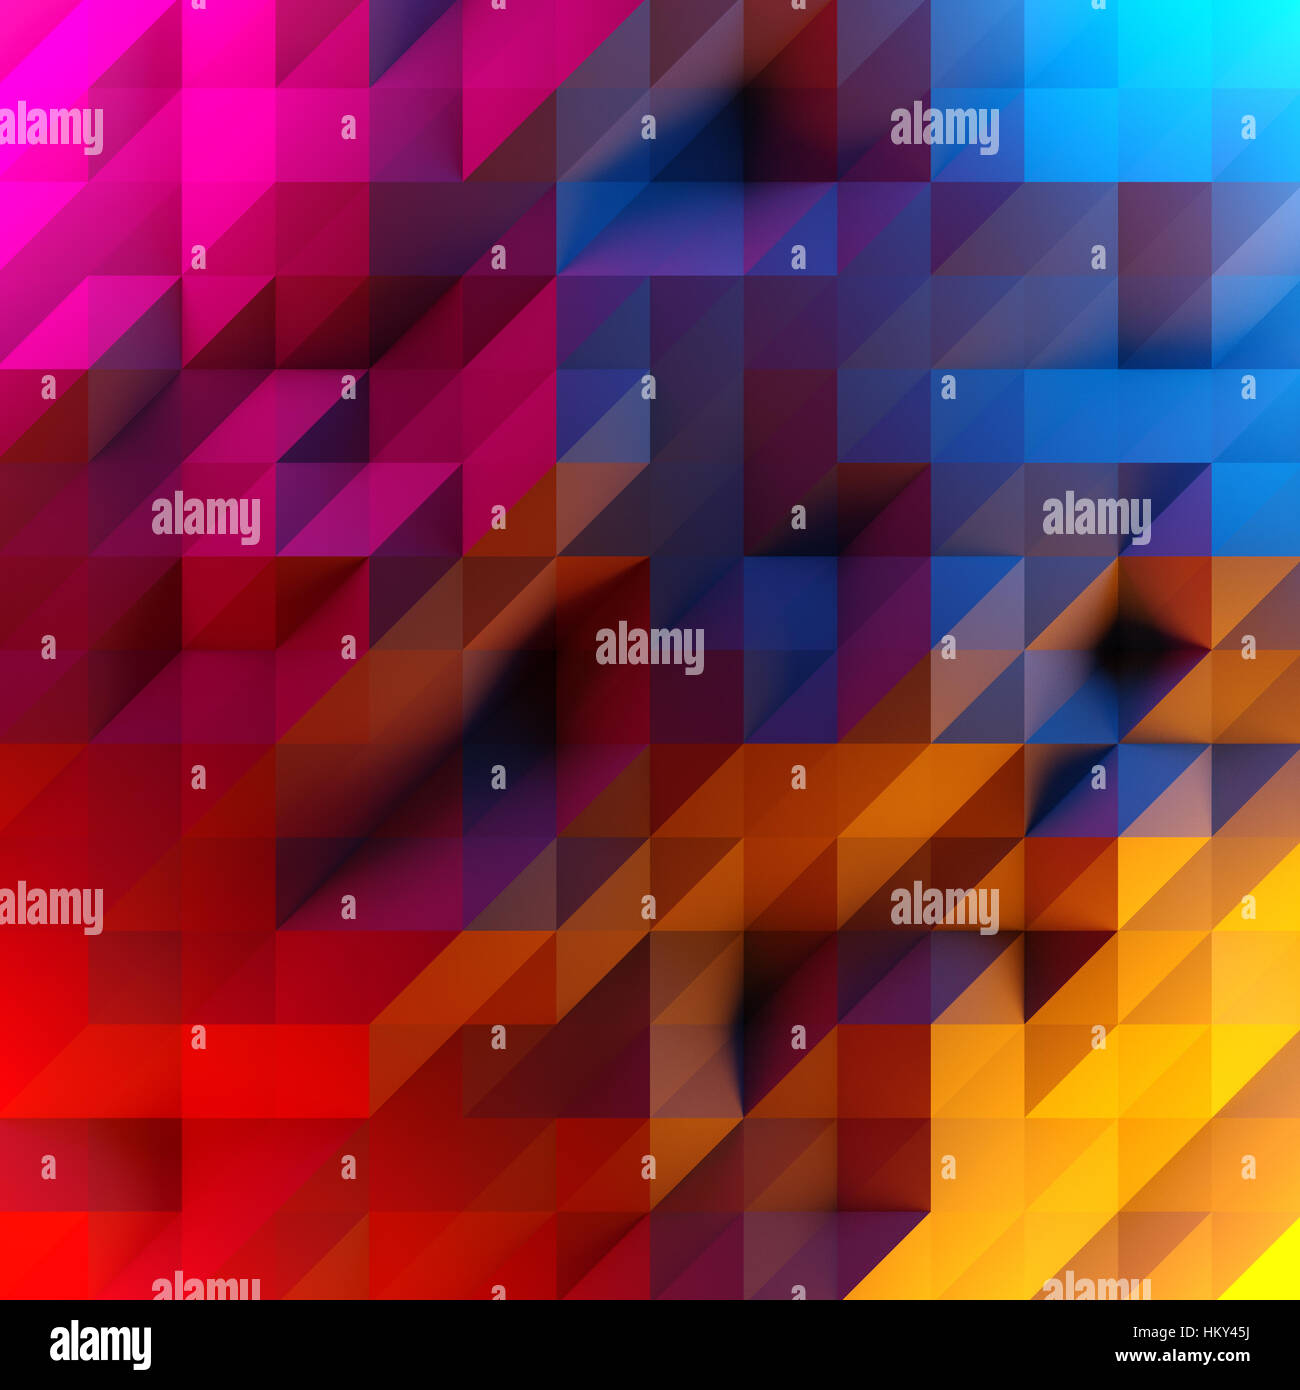 Abstract background of low poly triangles. 3D render image. Red, purple, orange and blue lighting. Stock Photo